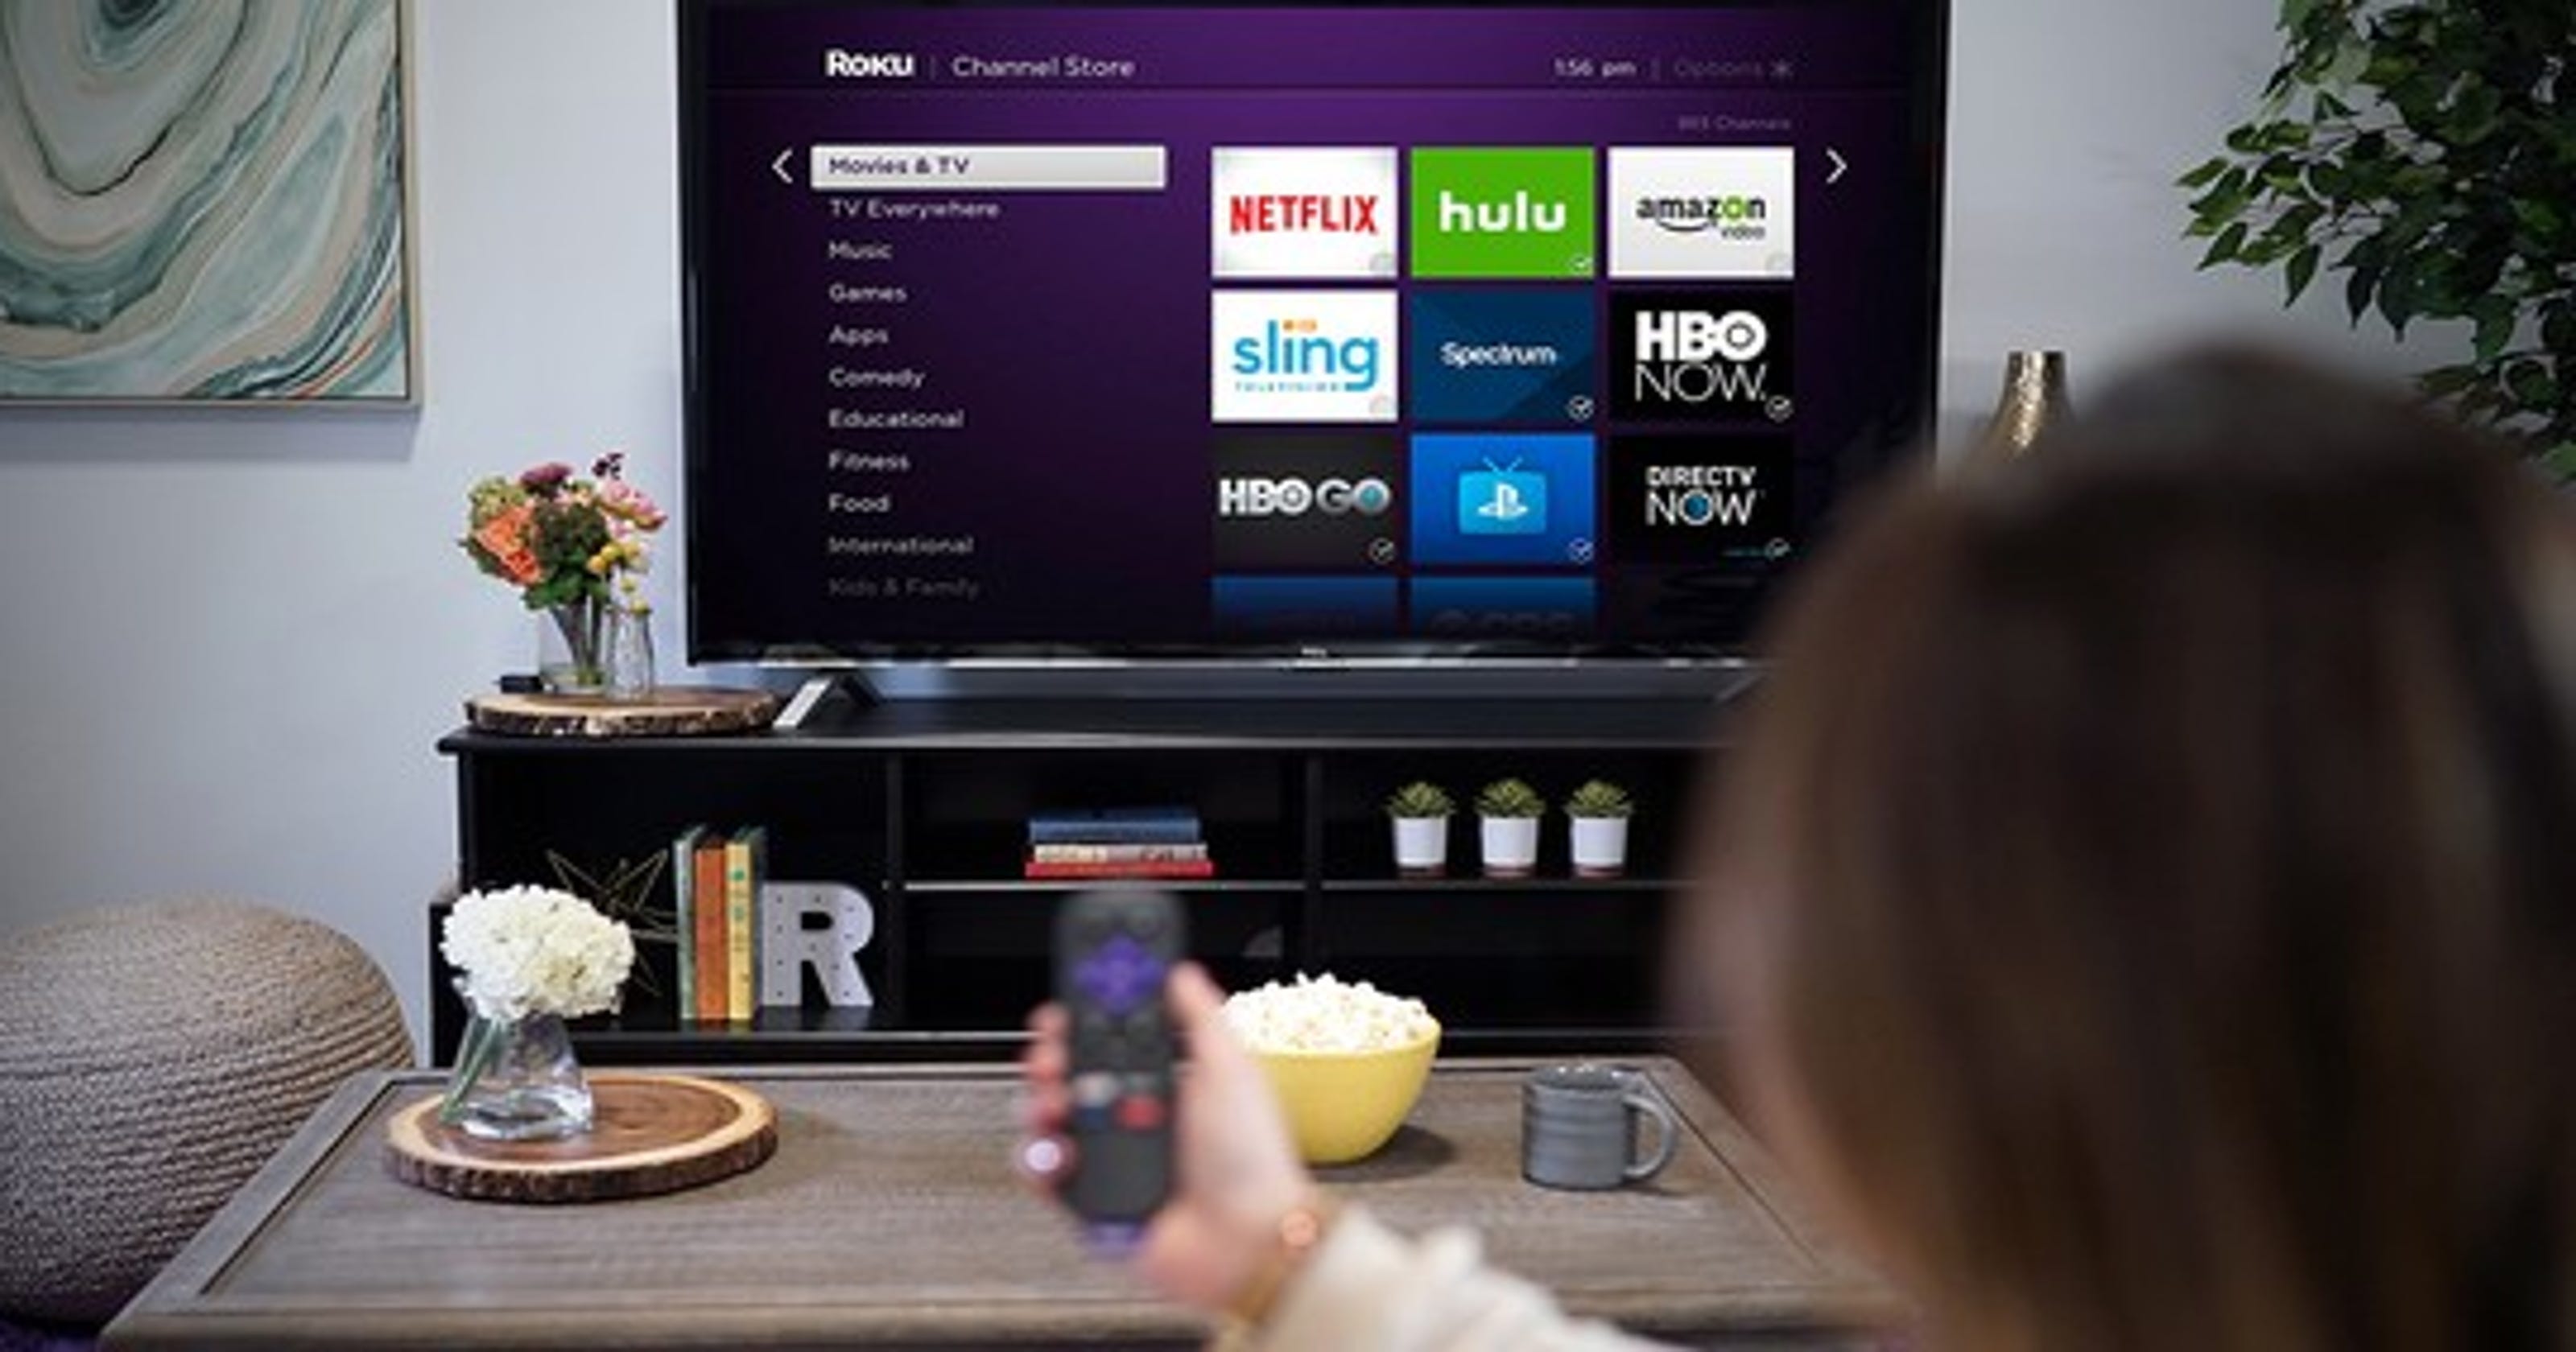 The best Black Friday TV deals of 2018: Samsung, LG, Roku and more (Updated November 16th)